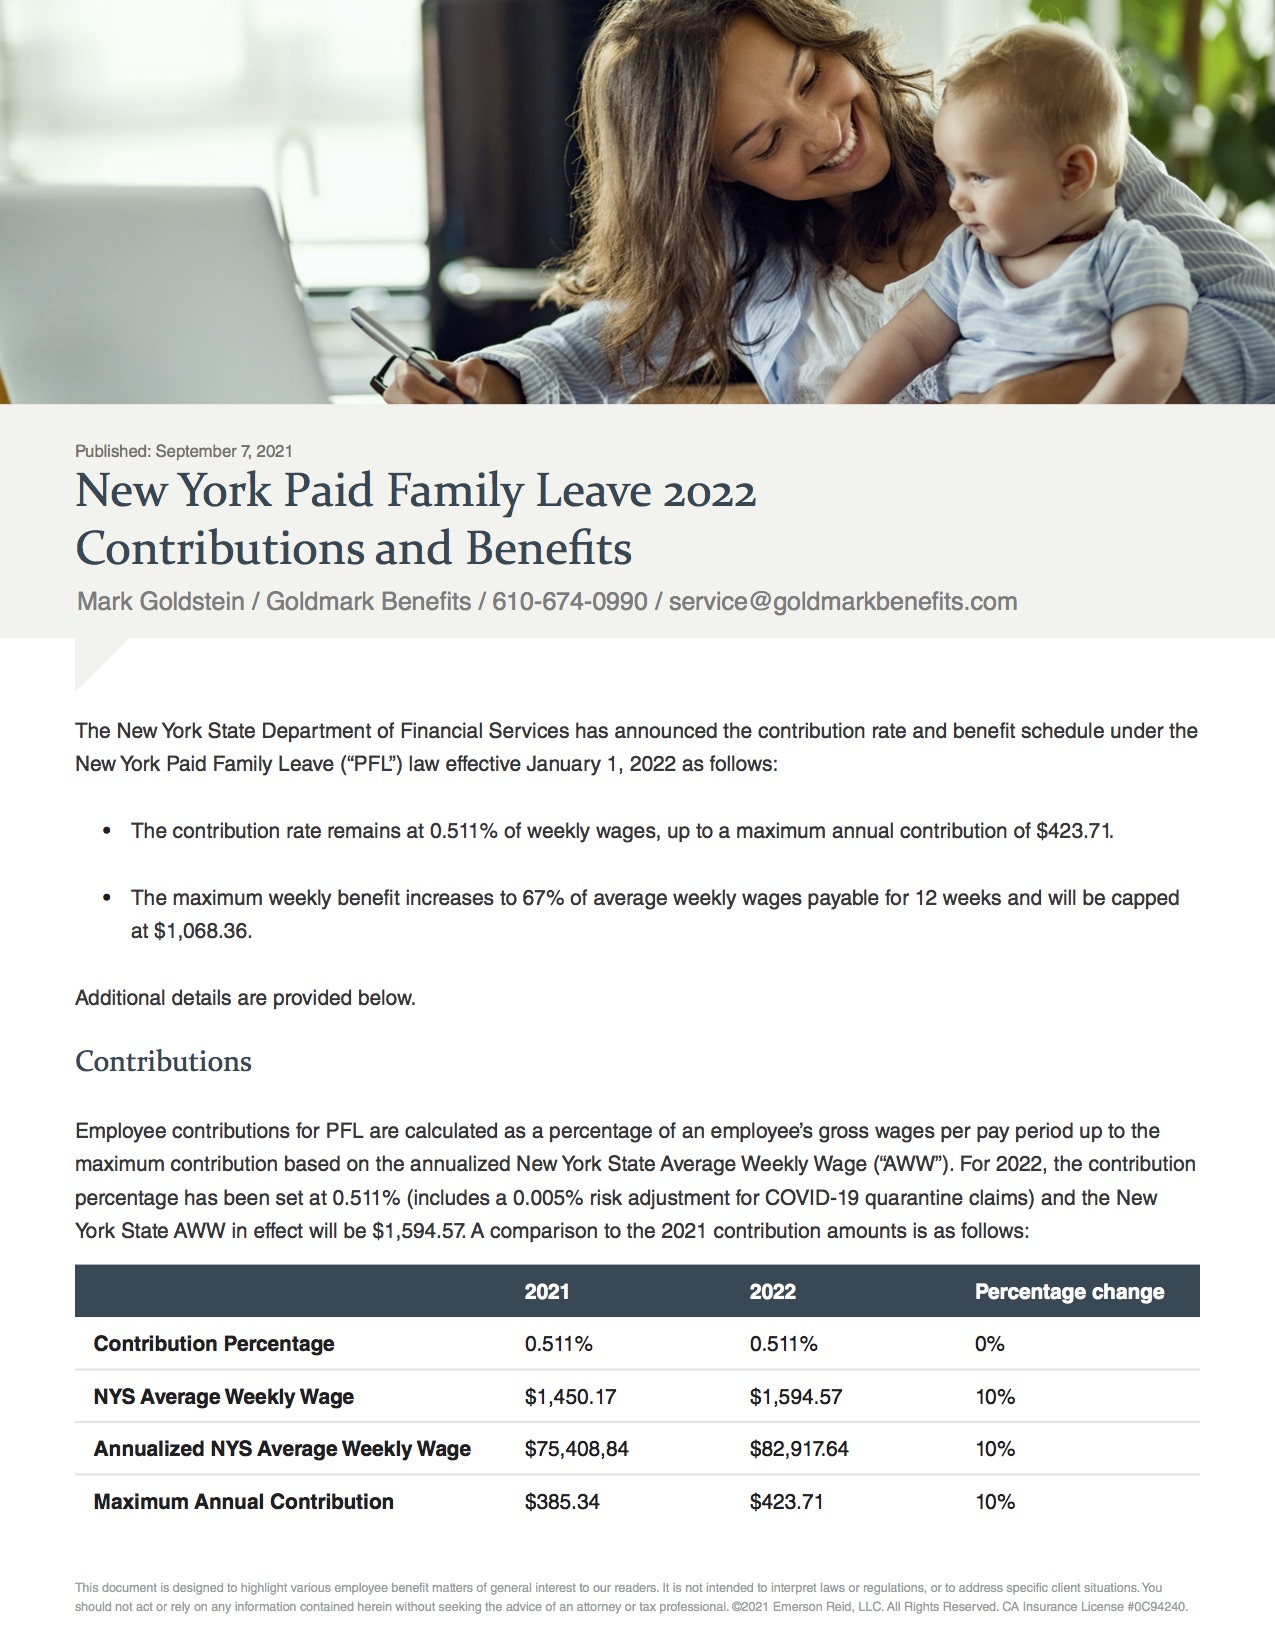 New York Paid Family Leave 2022 Contributions and Bene ts